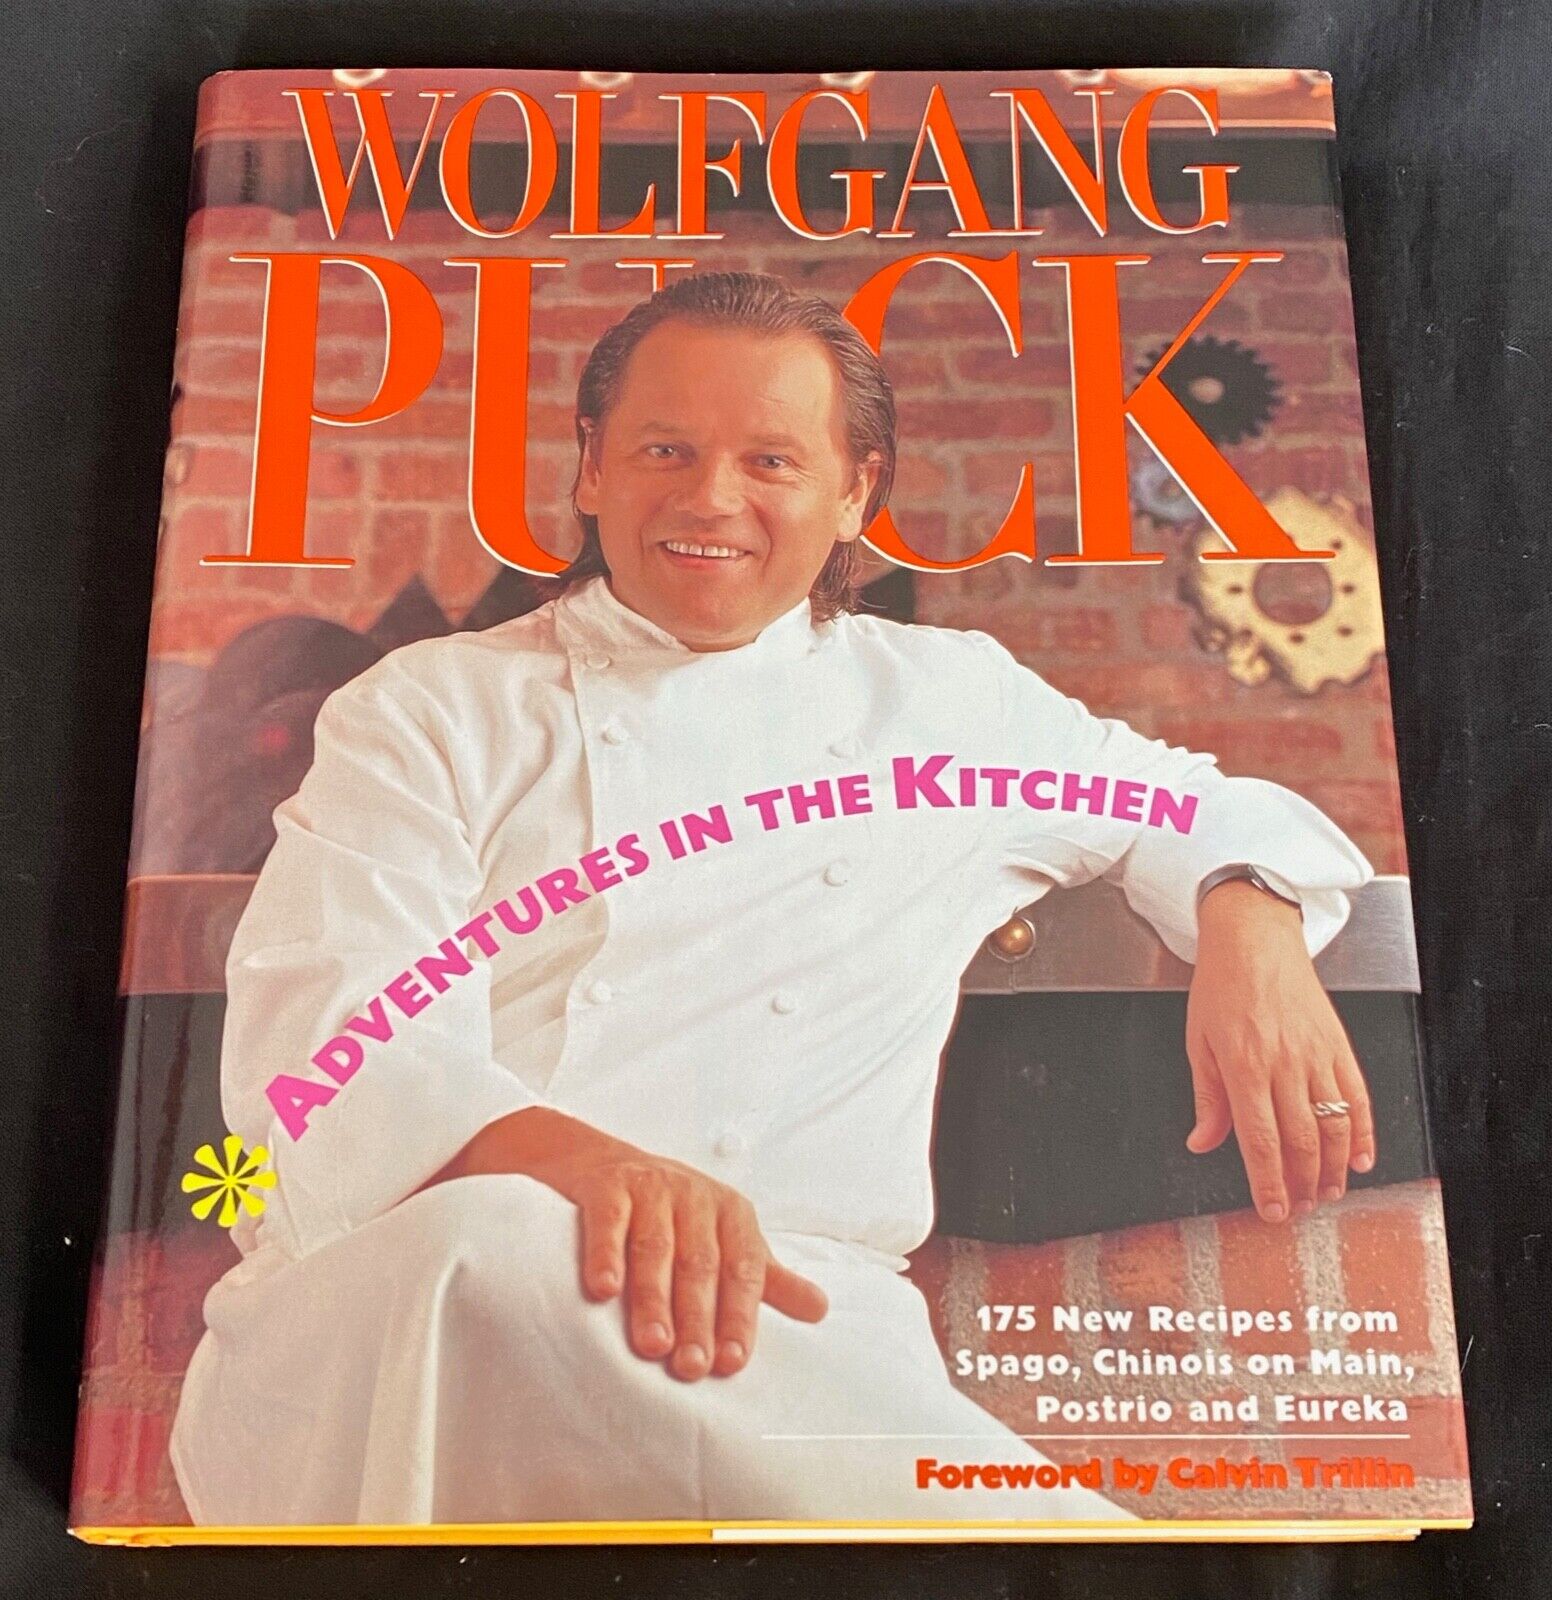 WOLFGANG PUCK SIGNED "SPAGO" APRON + "ADVENTURES IN THE KITCHEN" BOOK Без бренда - фотография #4